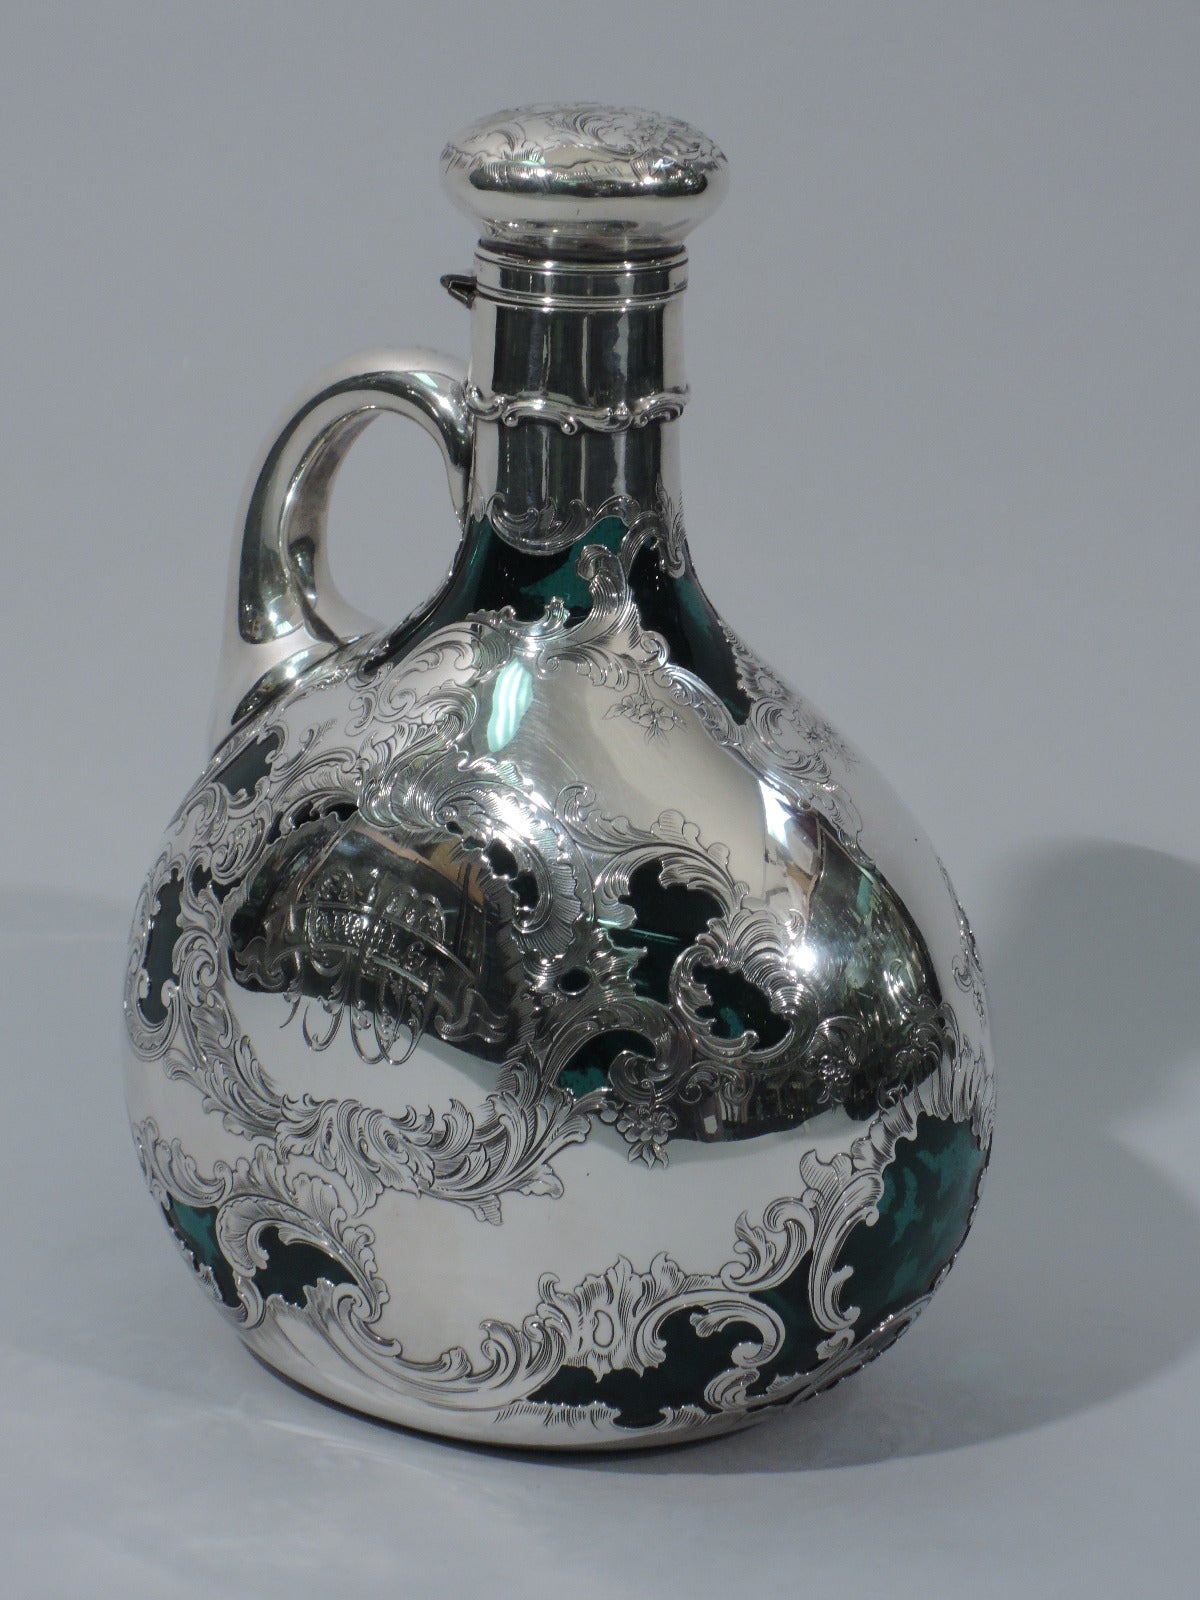 American Antique Gorham Jug Decanter in Emerald Glass with Silver Overlay